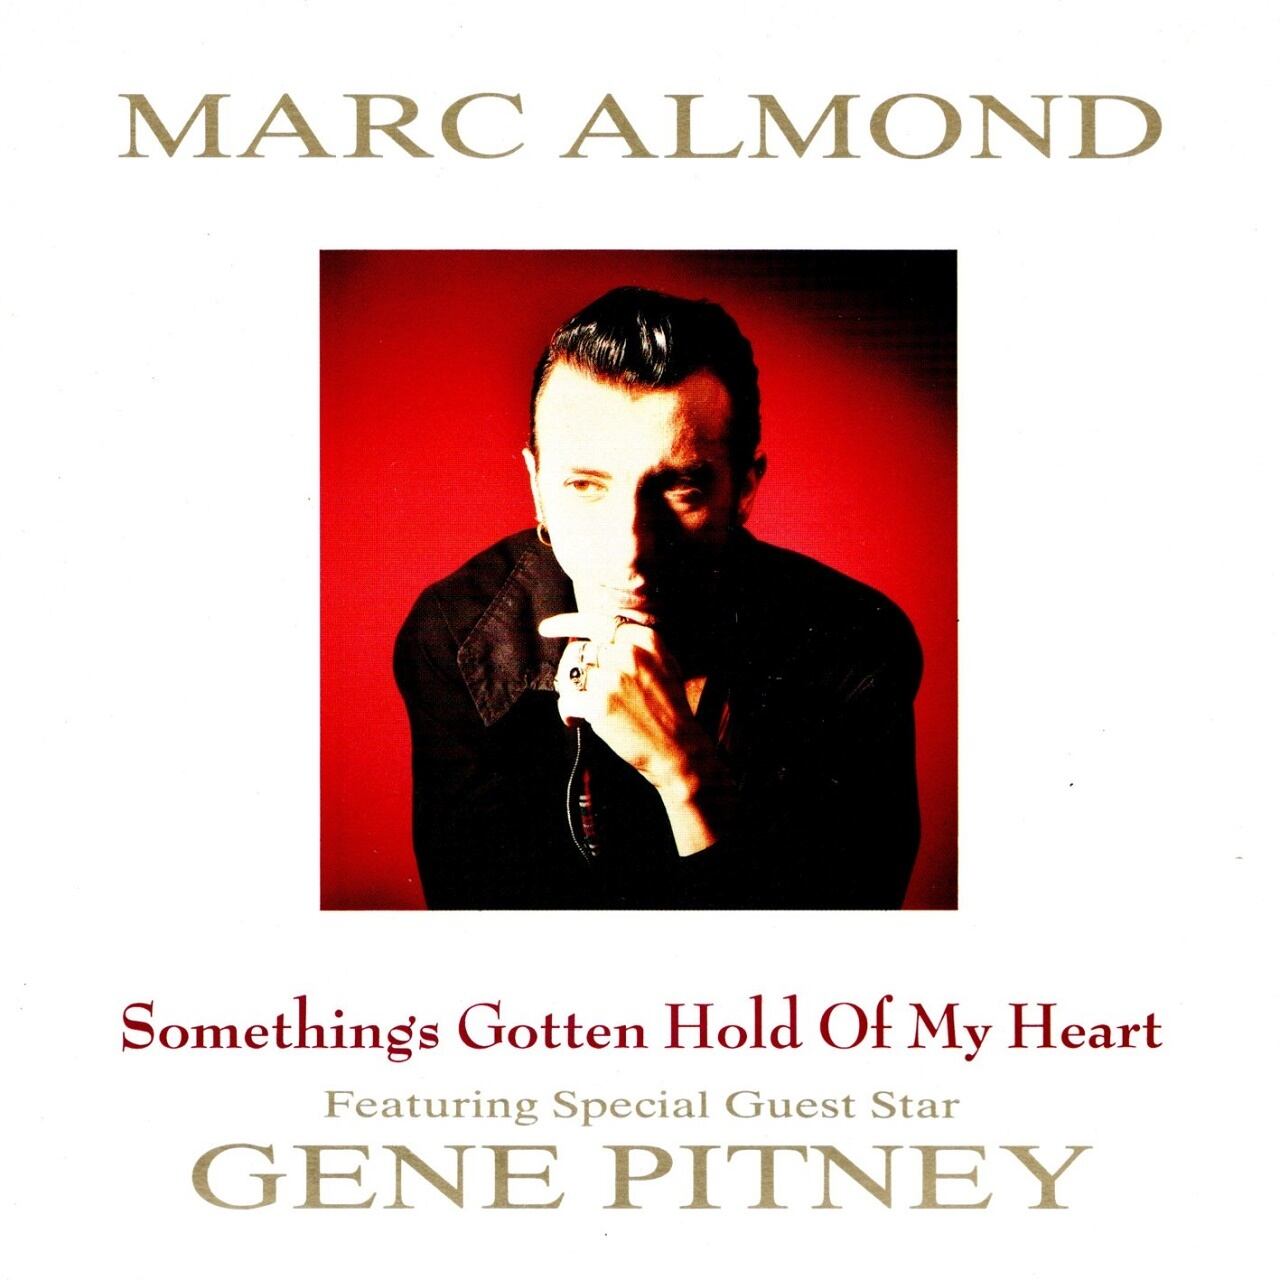 【7EP】Marc Almond (Featuring Special Guest Star Gene Pitney) – Something's Gotten Hold Of My Heart